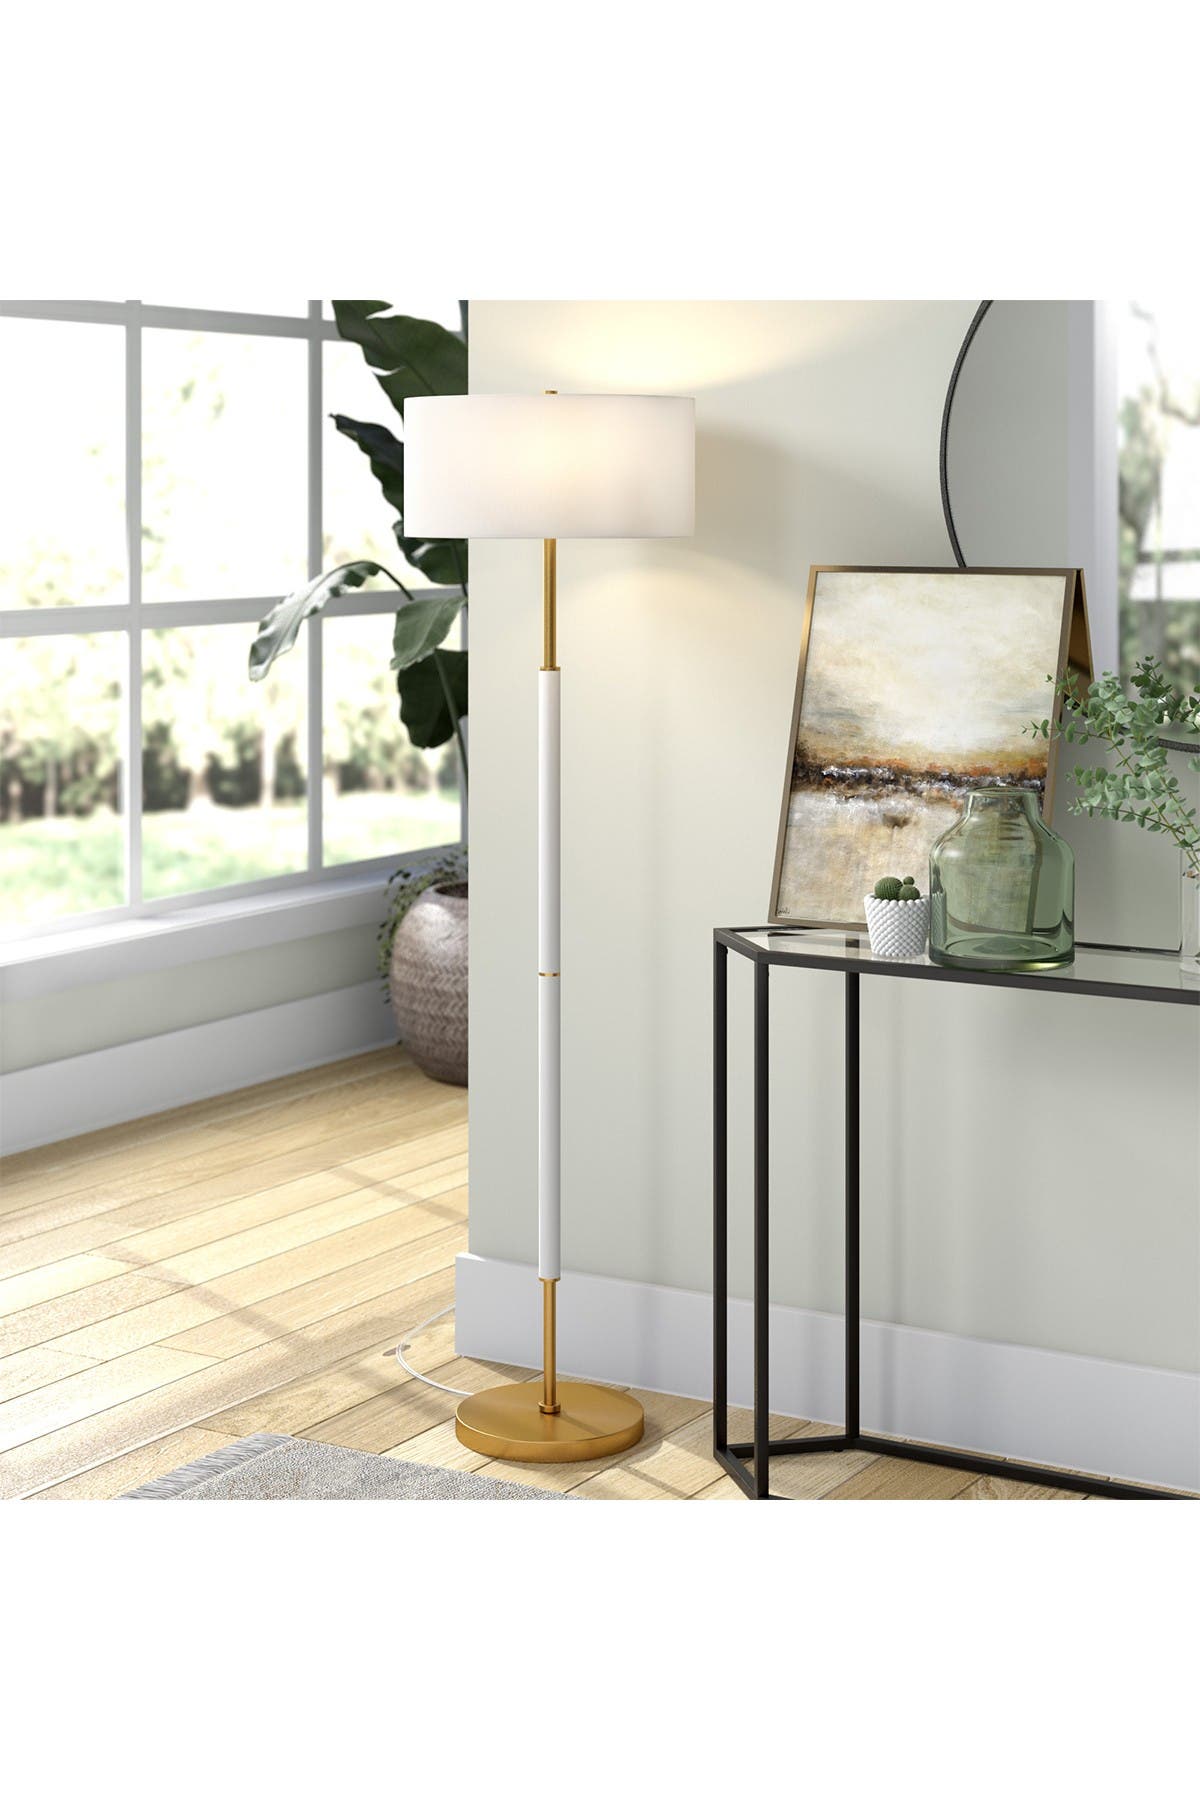 Addison And Lane Simone Matte White And Brass 2-bulb Floor Lamp In Gold5